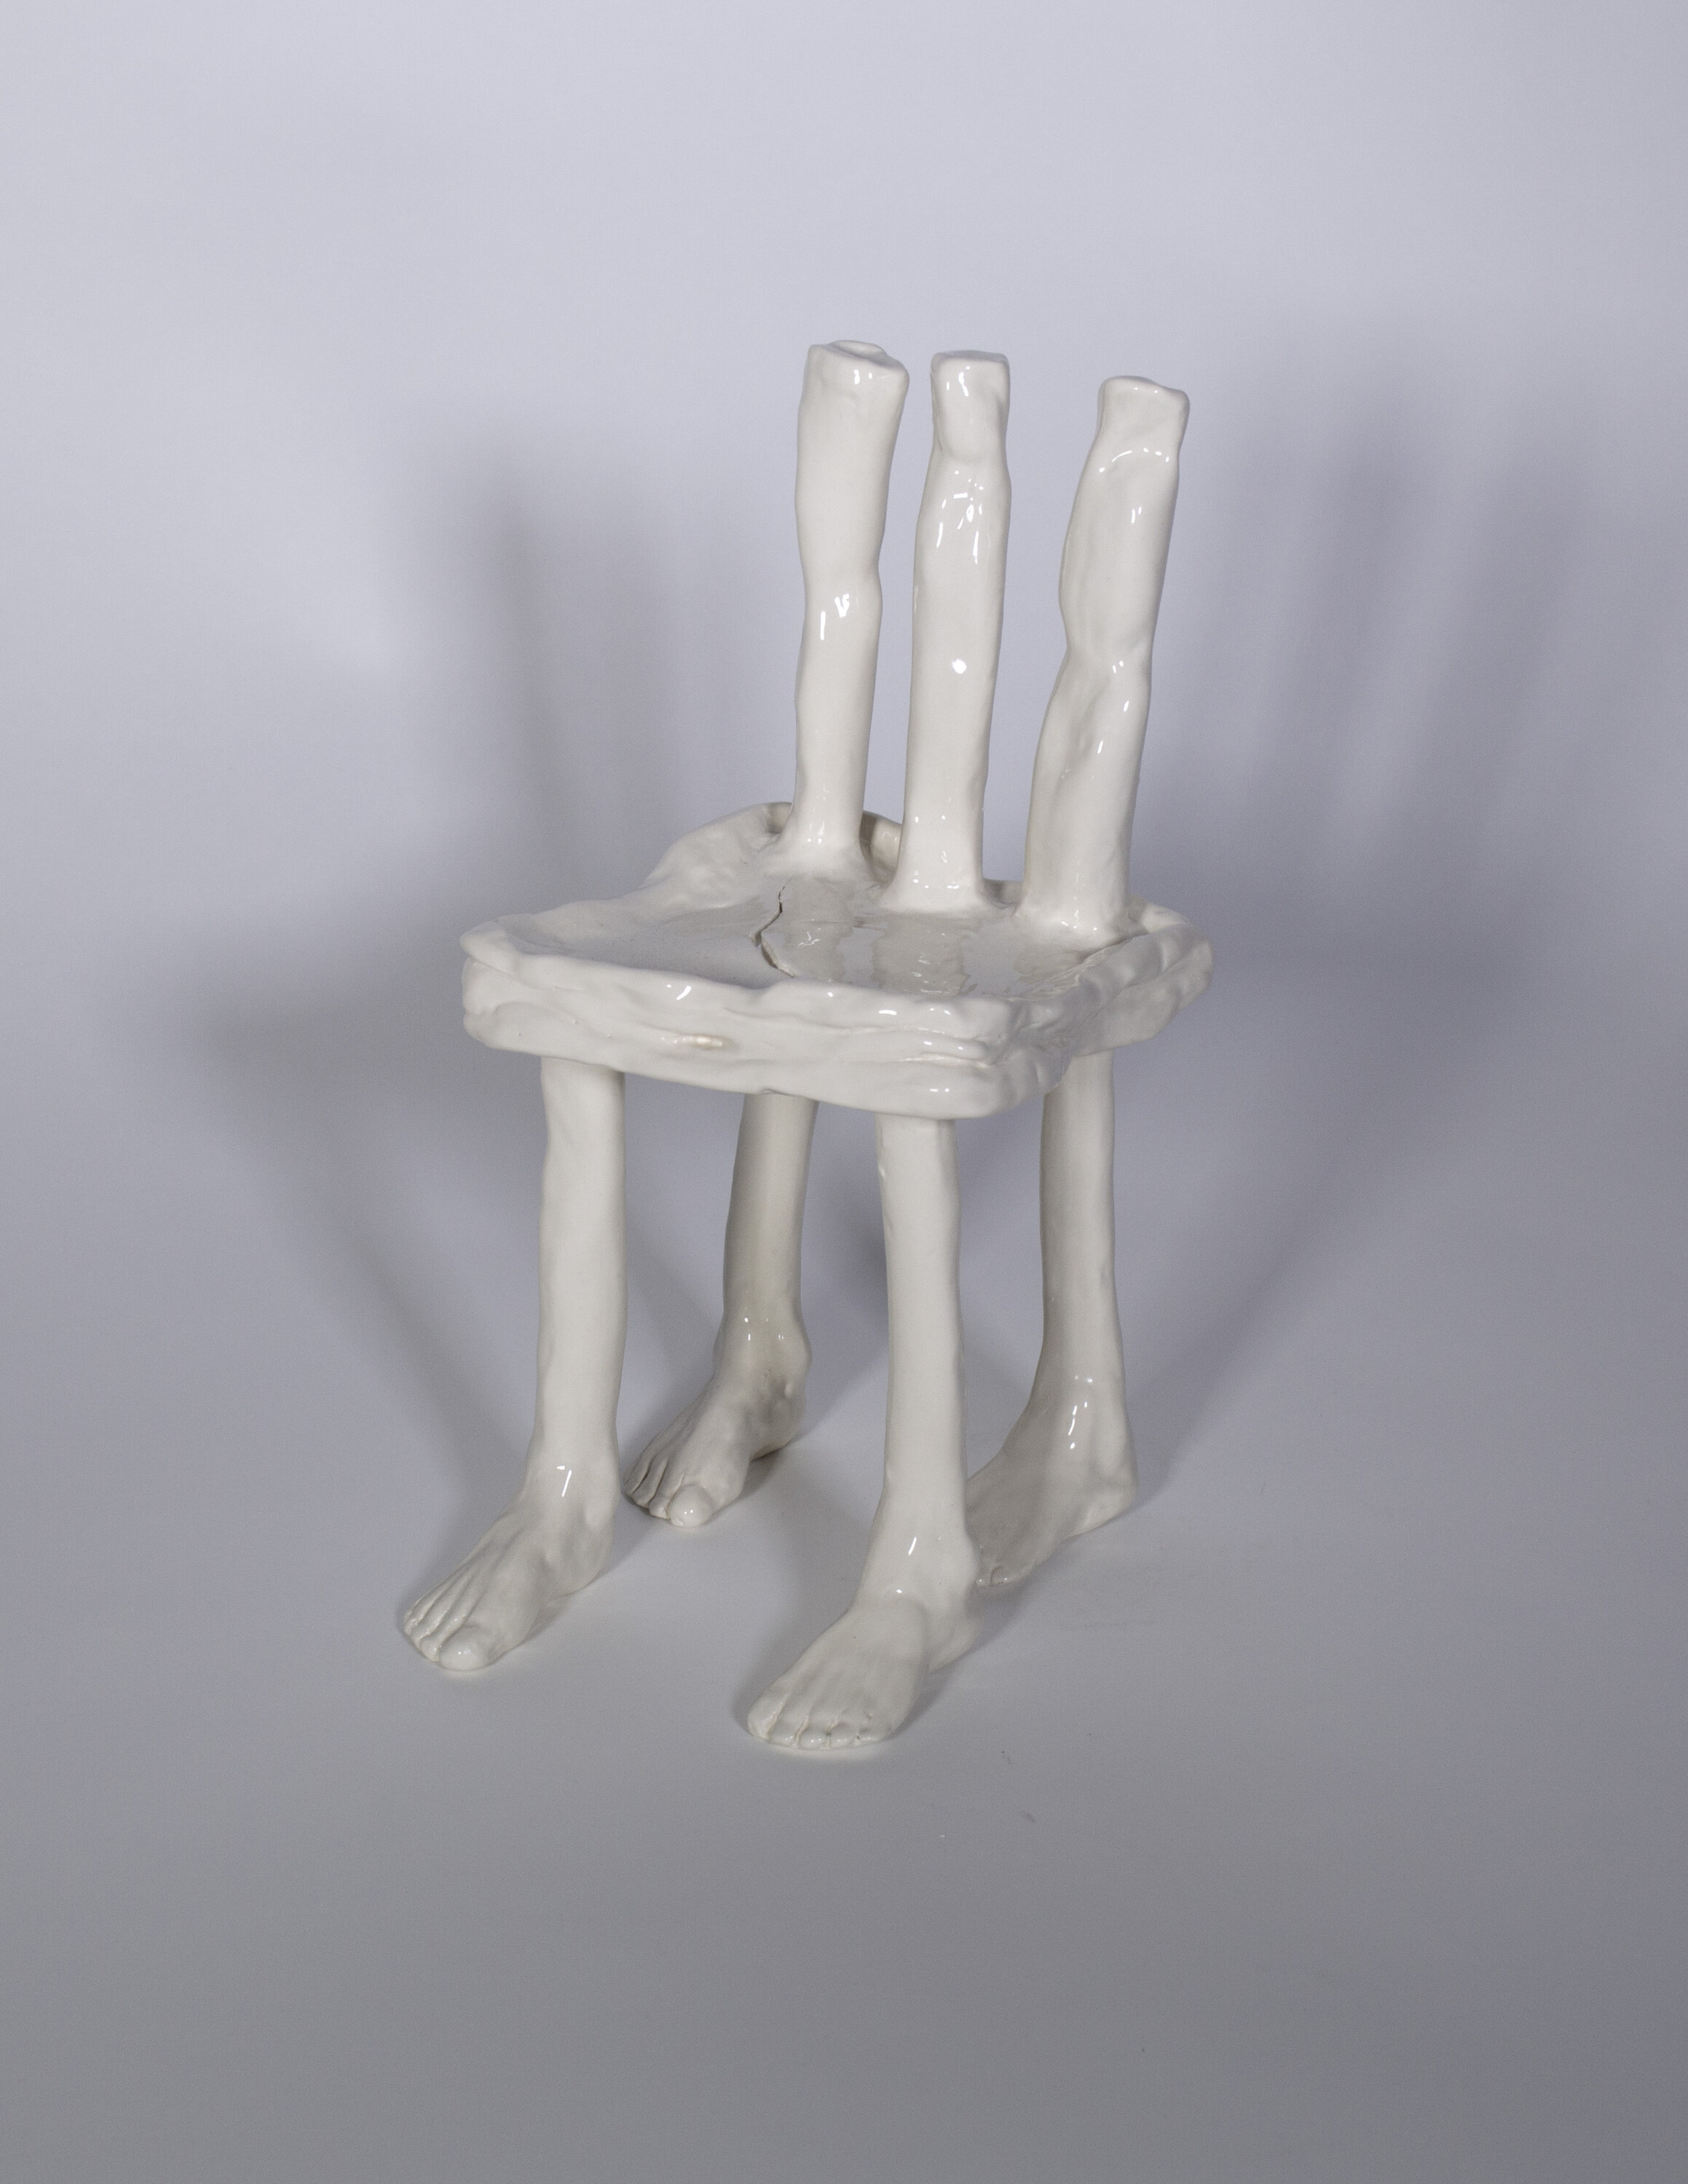 Ceramic chair. Ivory in color and has feet at the bottom of chair legs. There is a crack in the seat of the chair. Three wonky cylinders make up the back of the chair